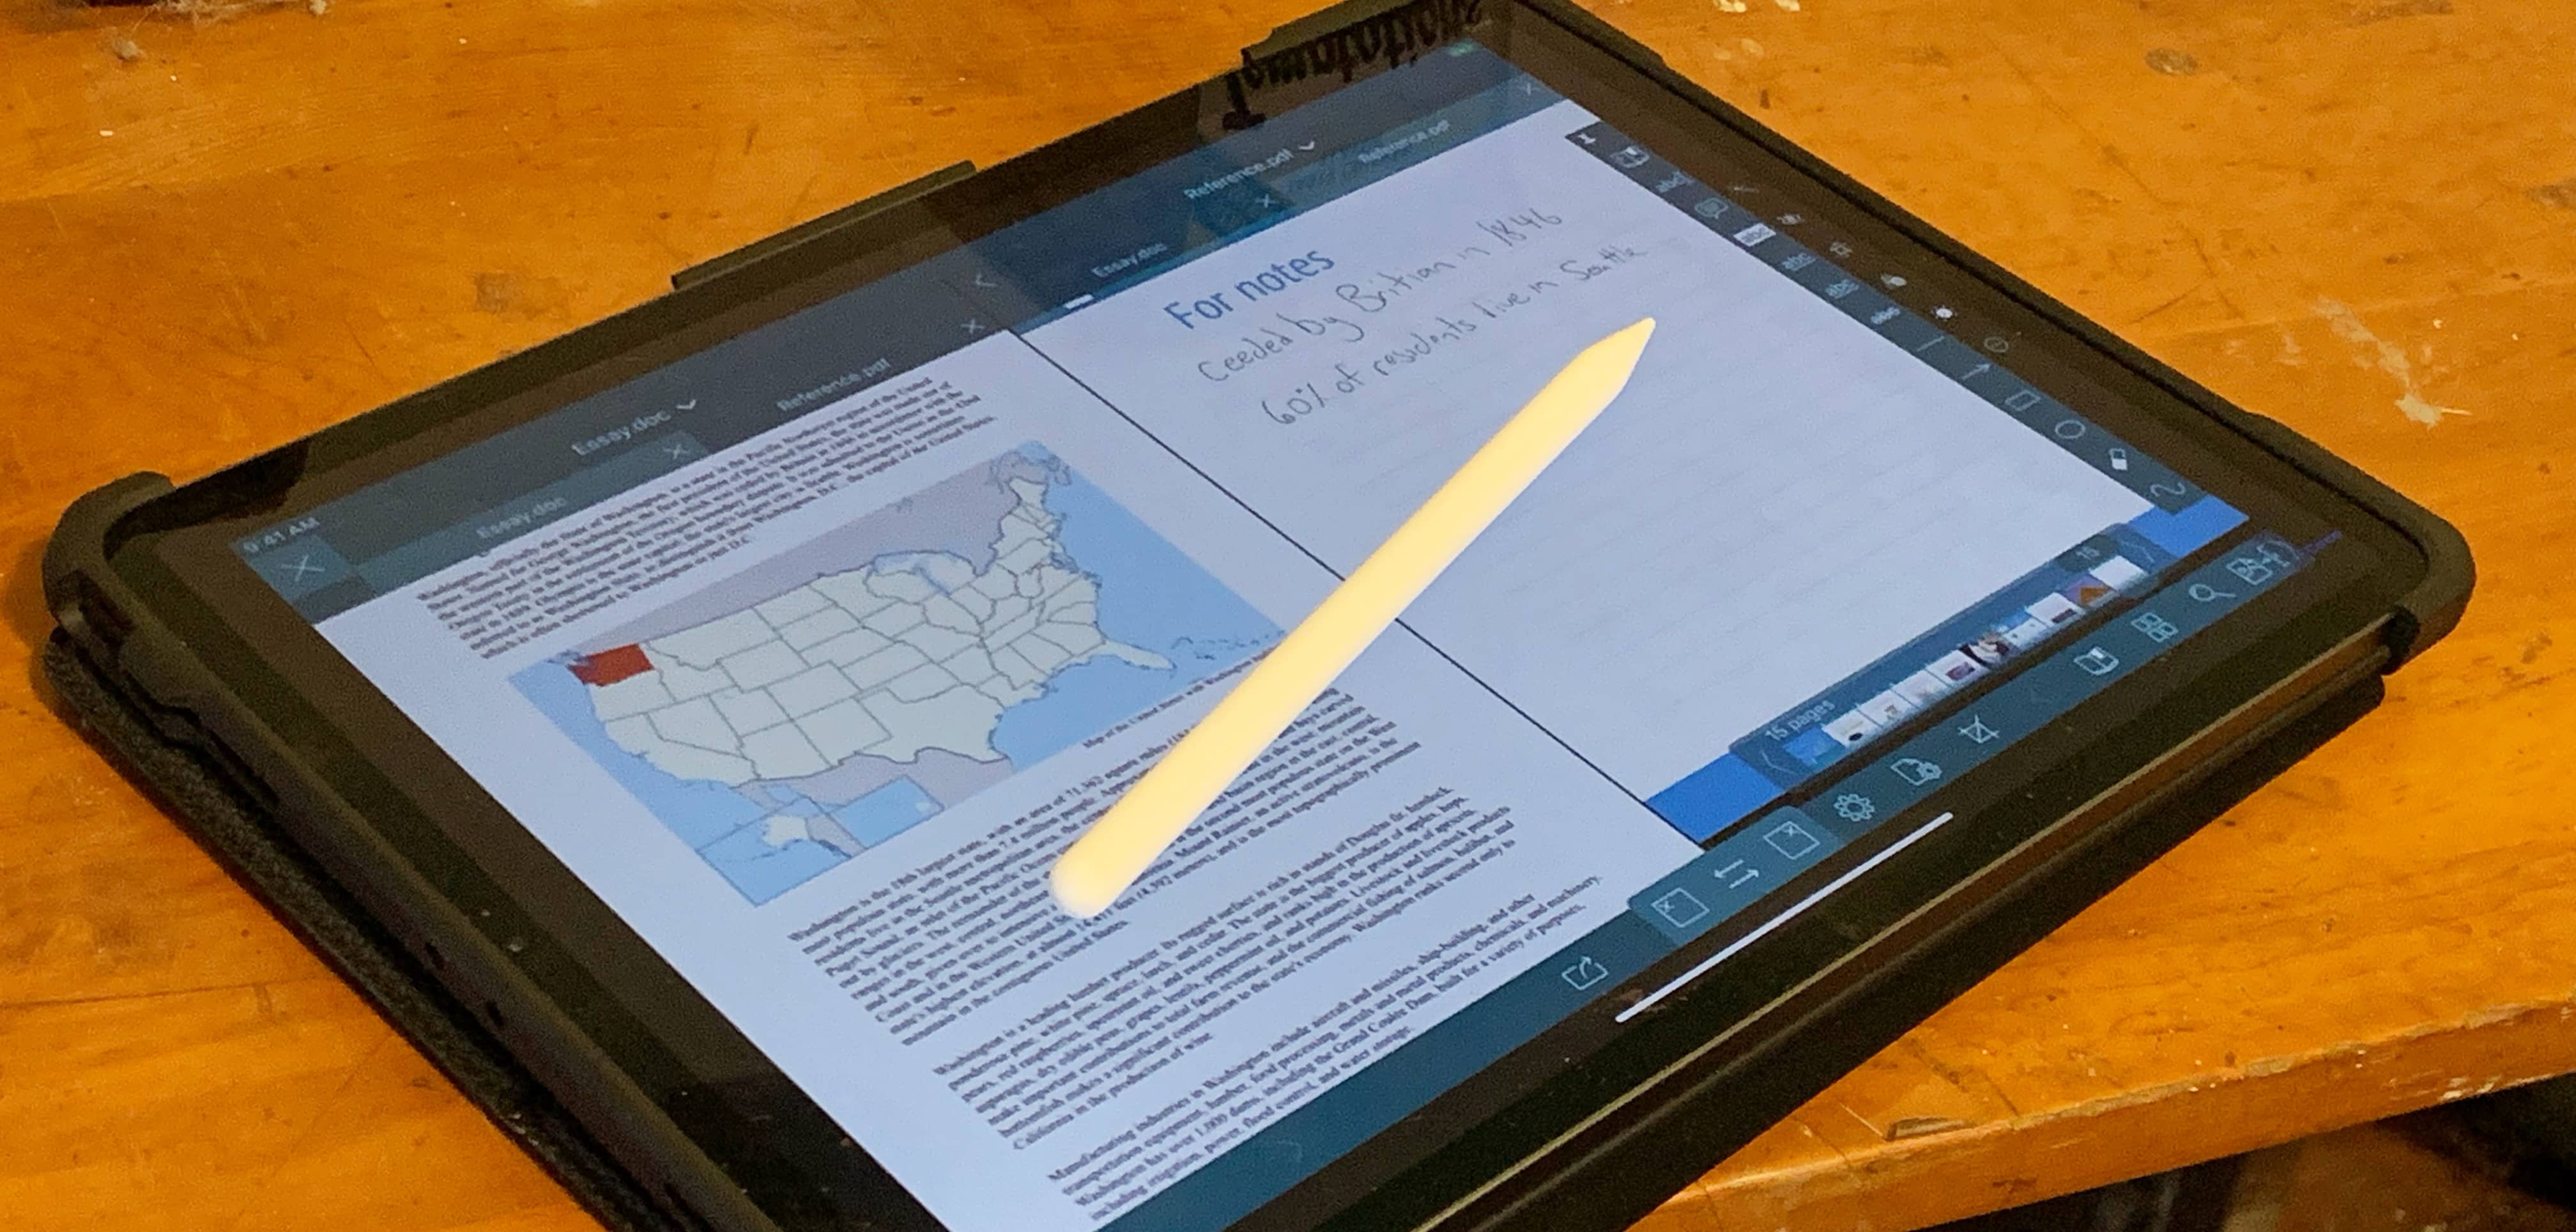 iPad users can view two documents side-by-side with GoodReader 5.